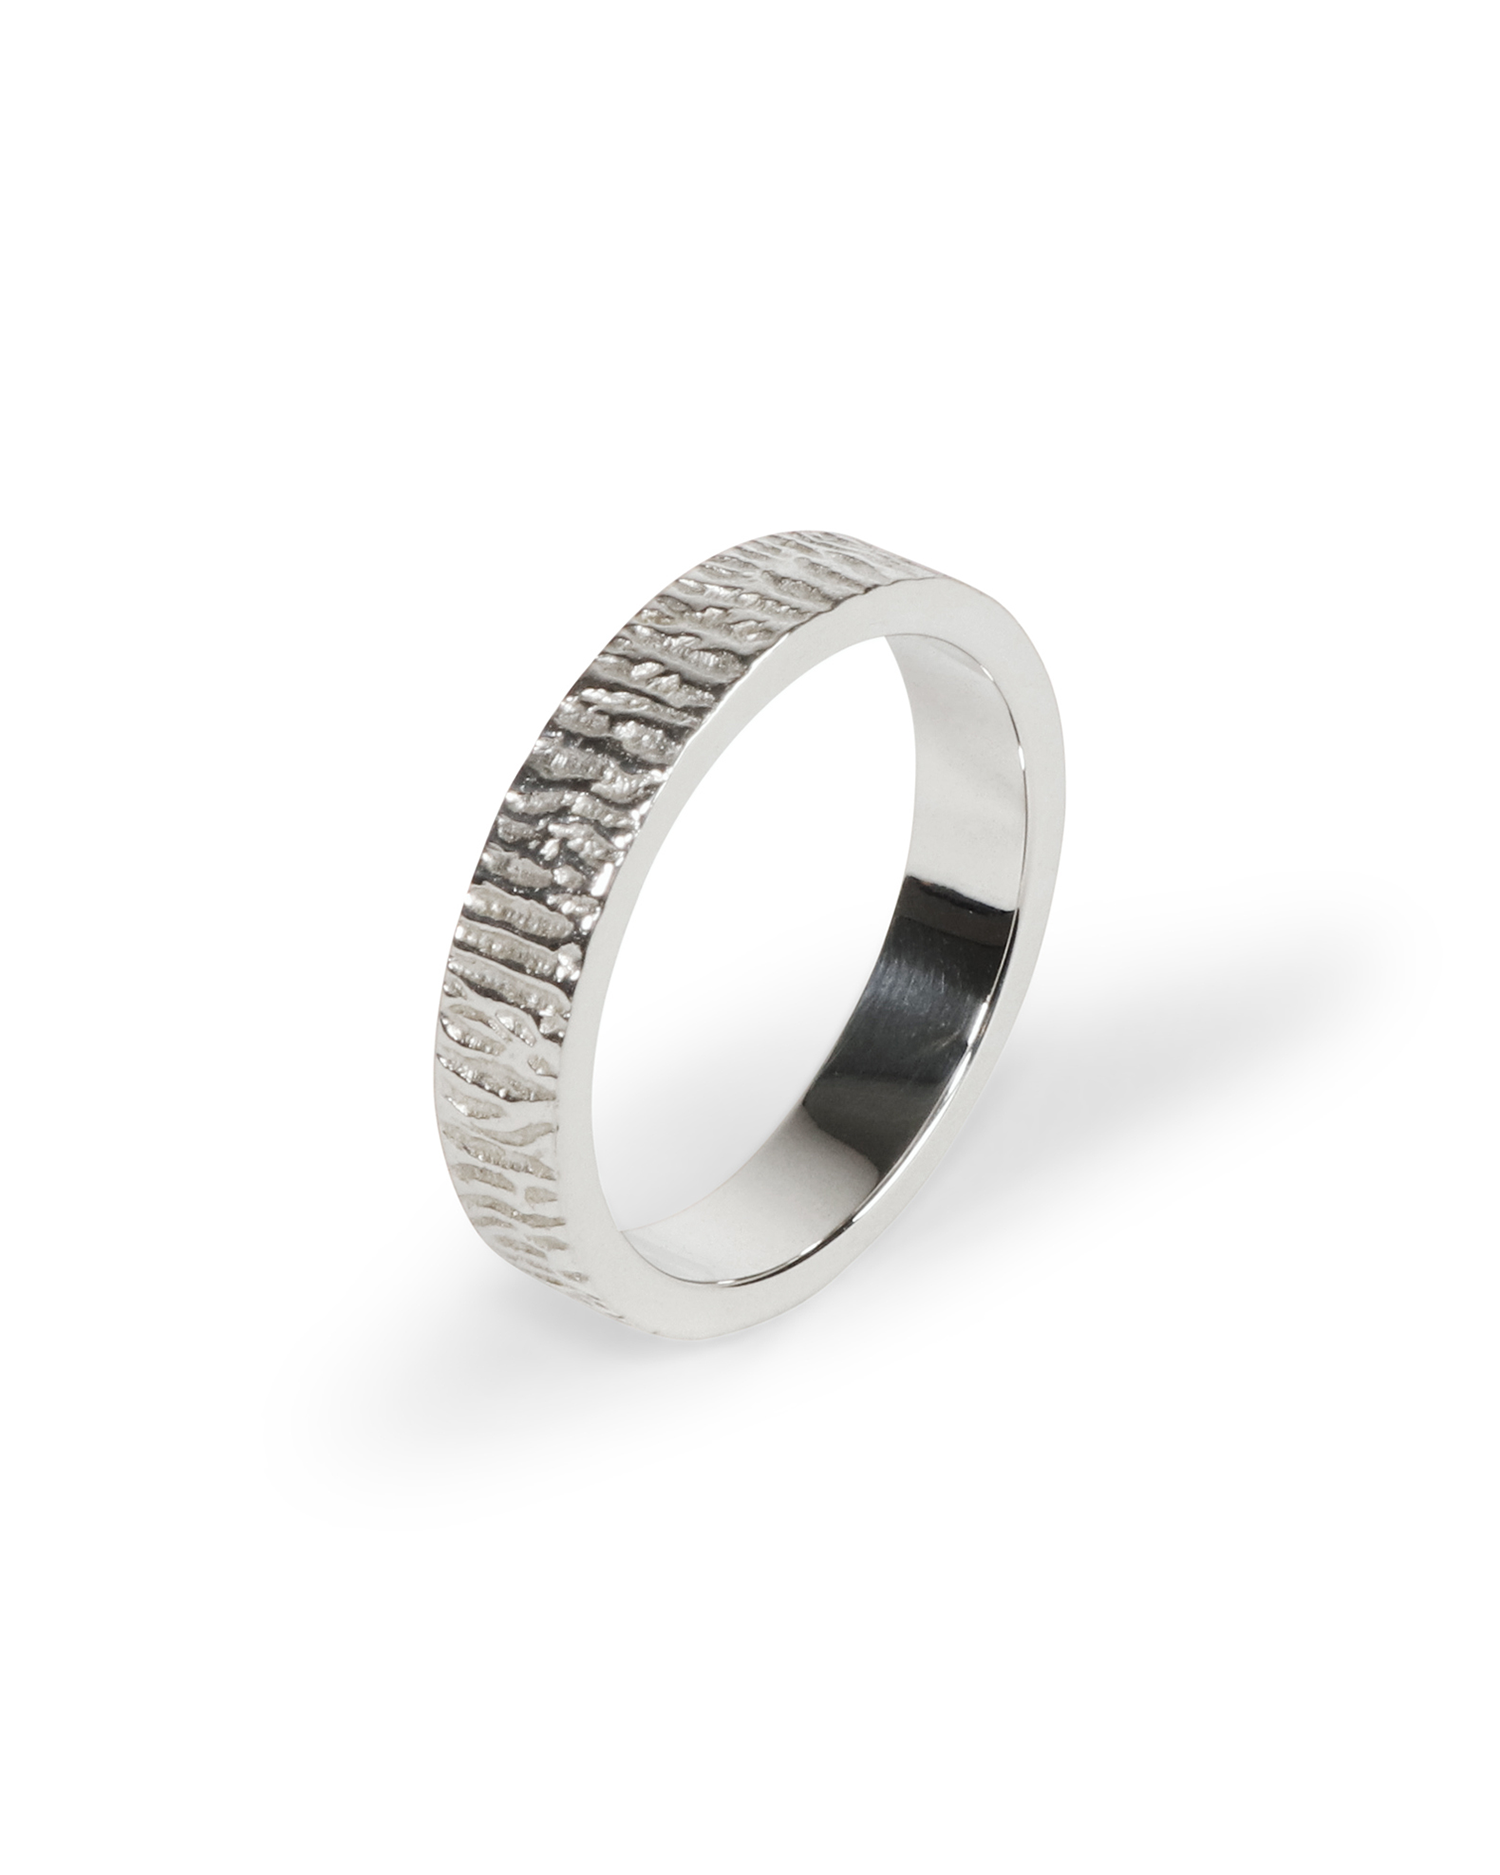 TYPE 005 Texture Ring - 925 Sterling Silver